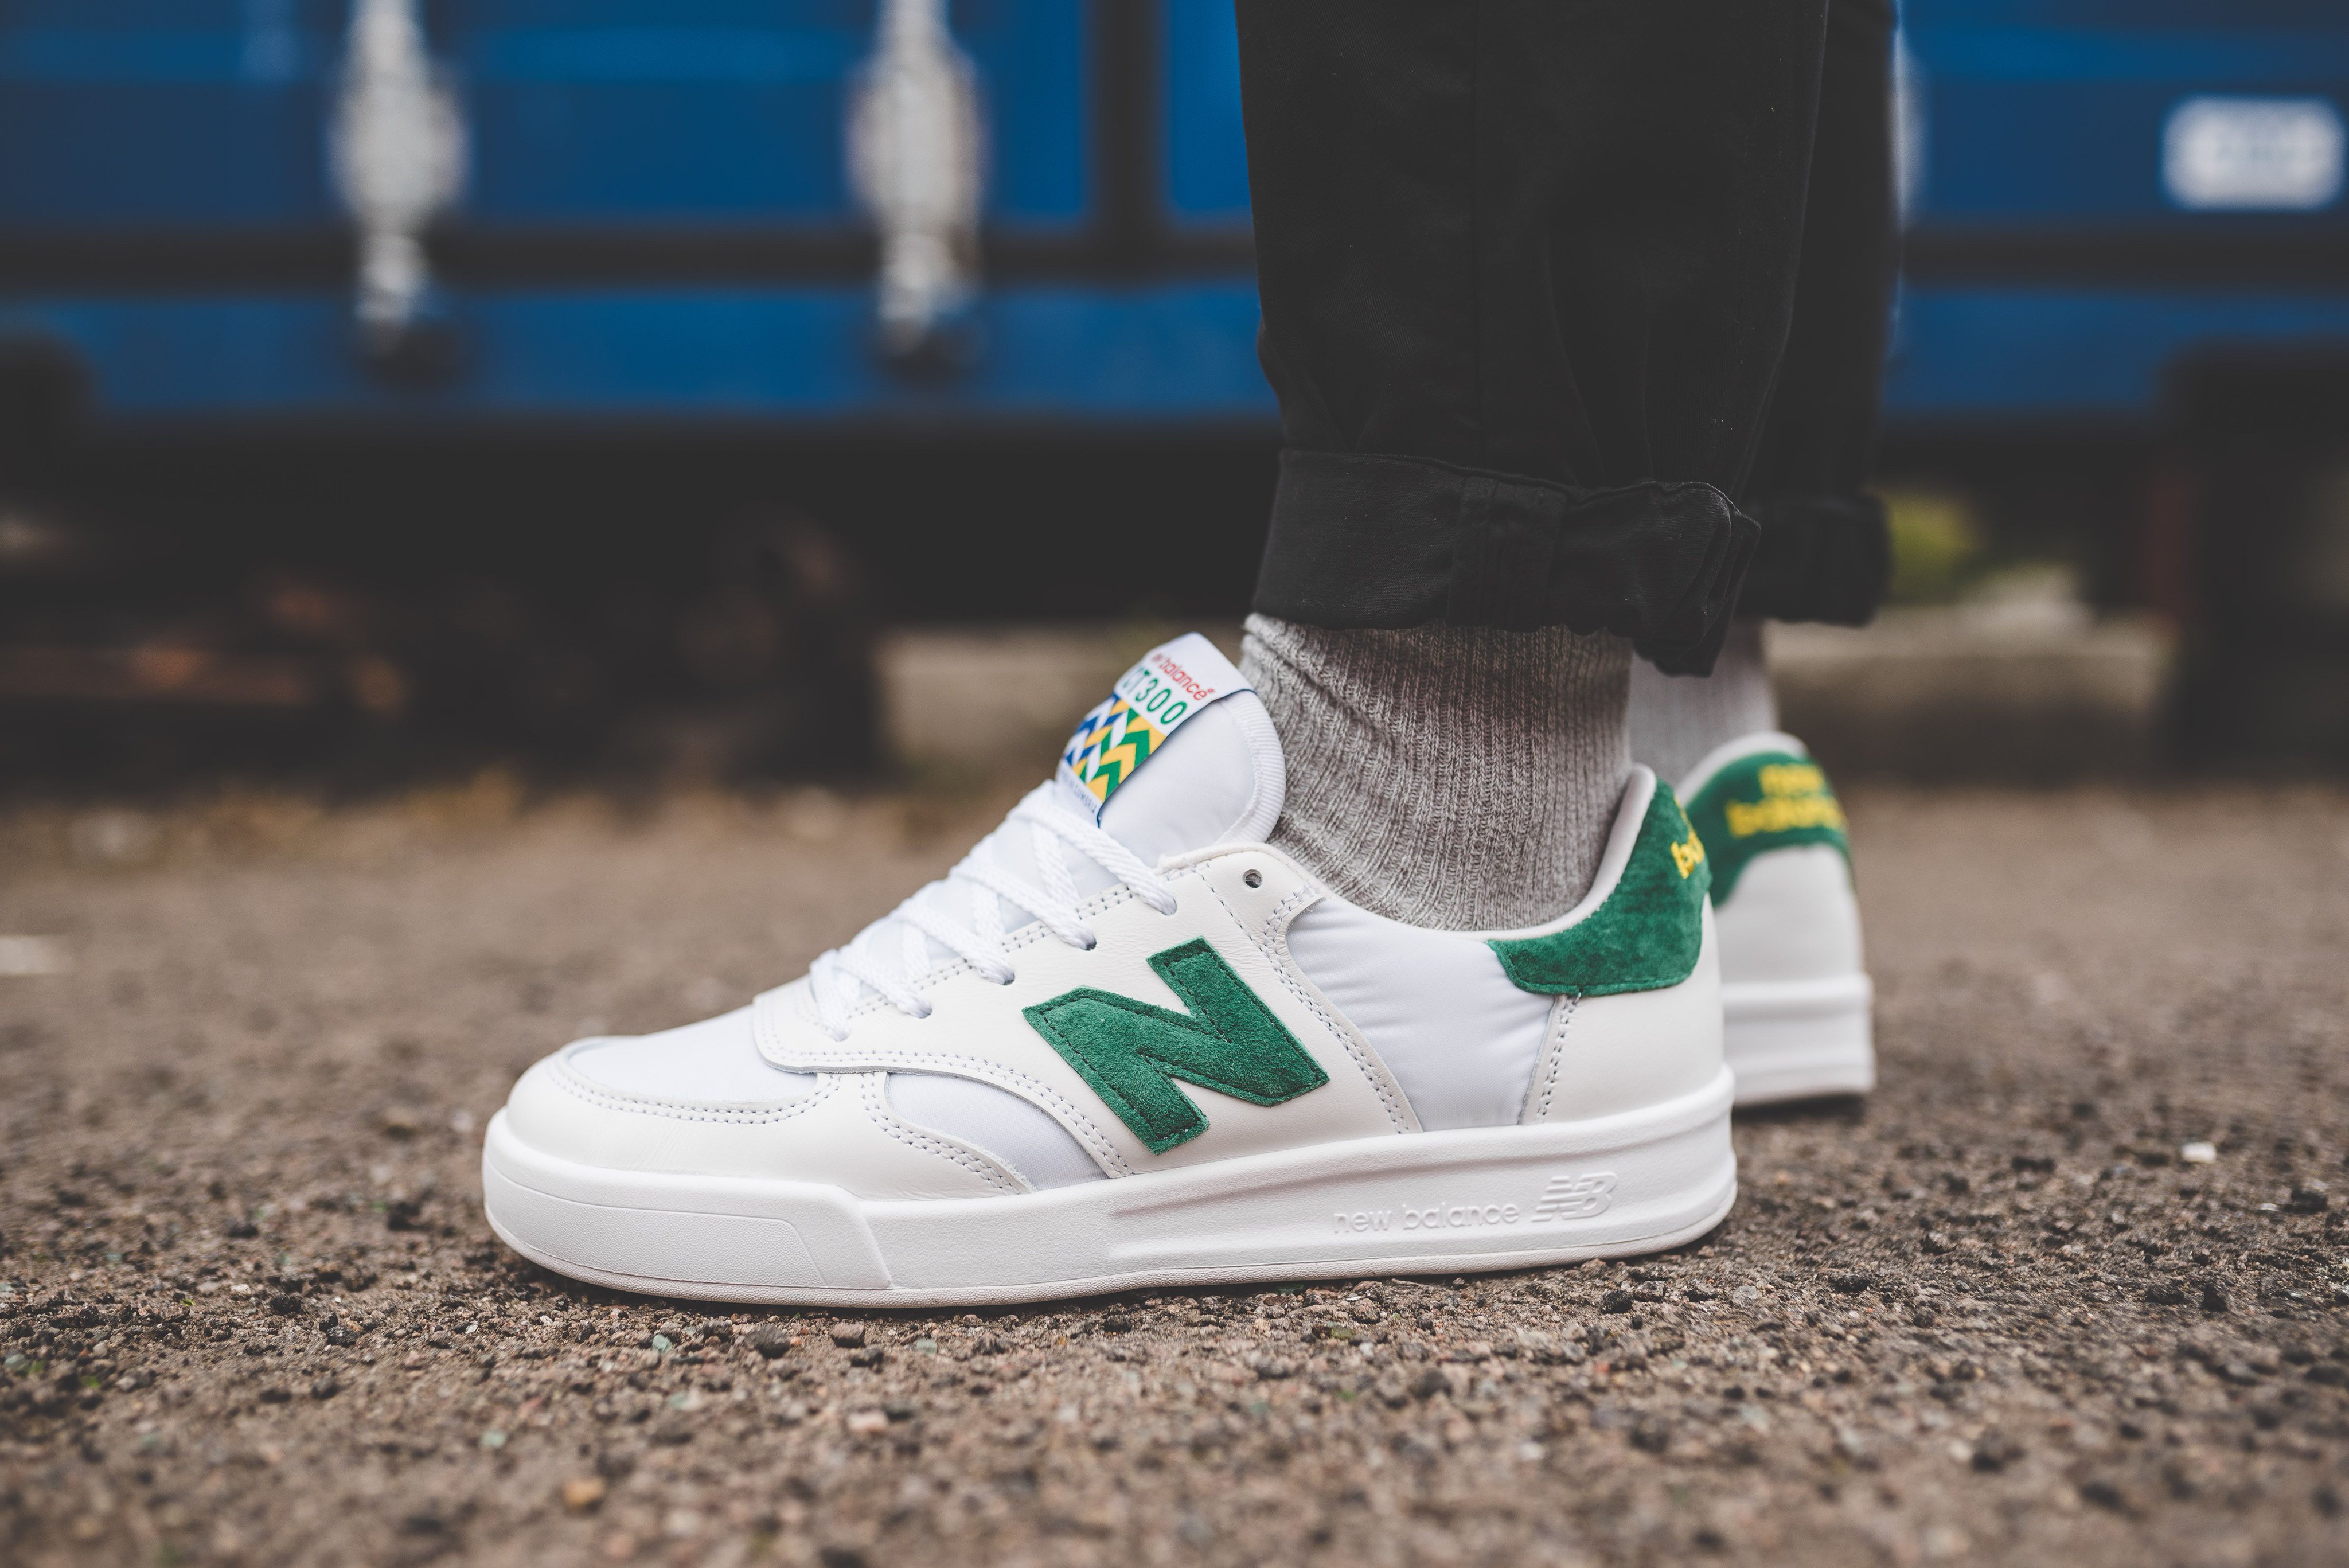 Ingresos habla Naturaleza HANON on Twitter: "Made in UK New Balance CT300 "Cumbrian Pack" is  available to buy ONLINE now! #hanon #newbalance #cumbrianpack  https://t.co/IHamAP2t4p https://t.co/VbD2yiNpb2" / Twitter